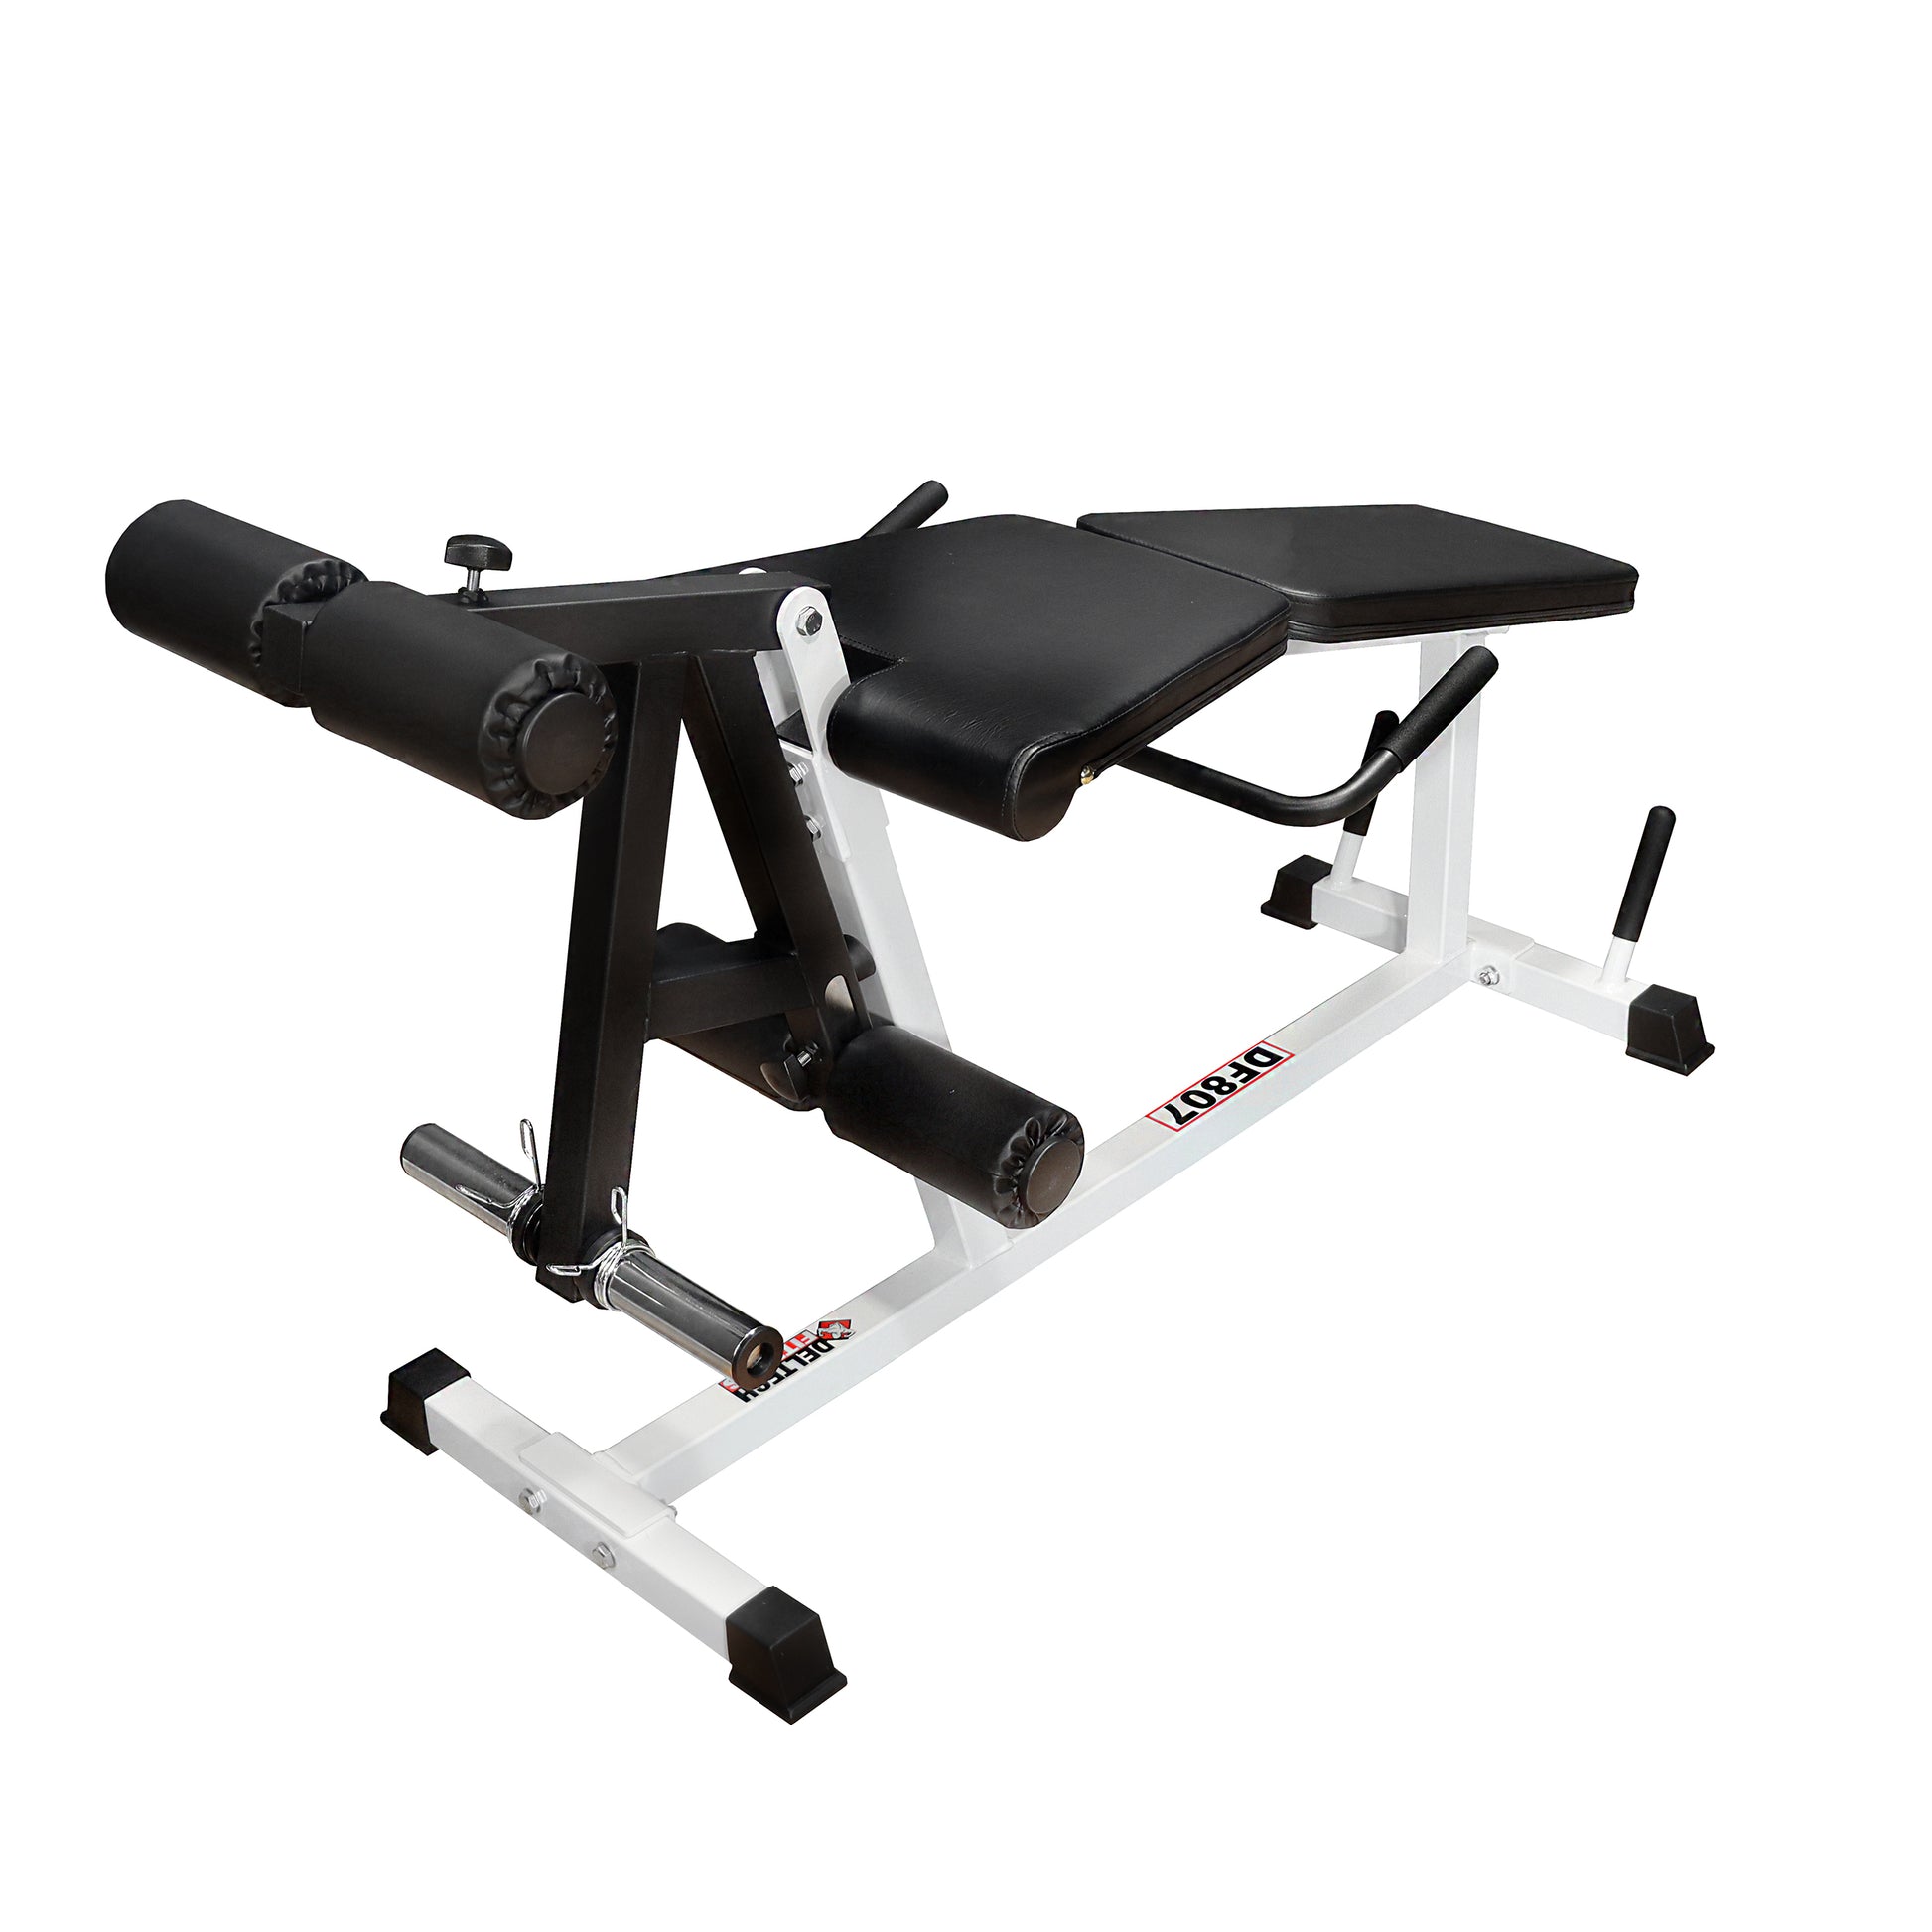 Leg exercise bench front view